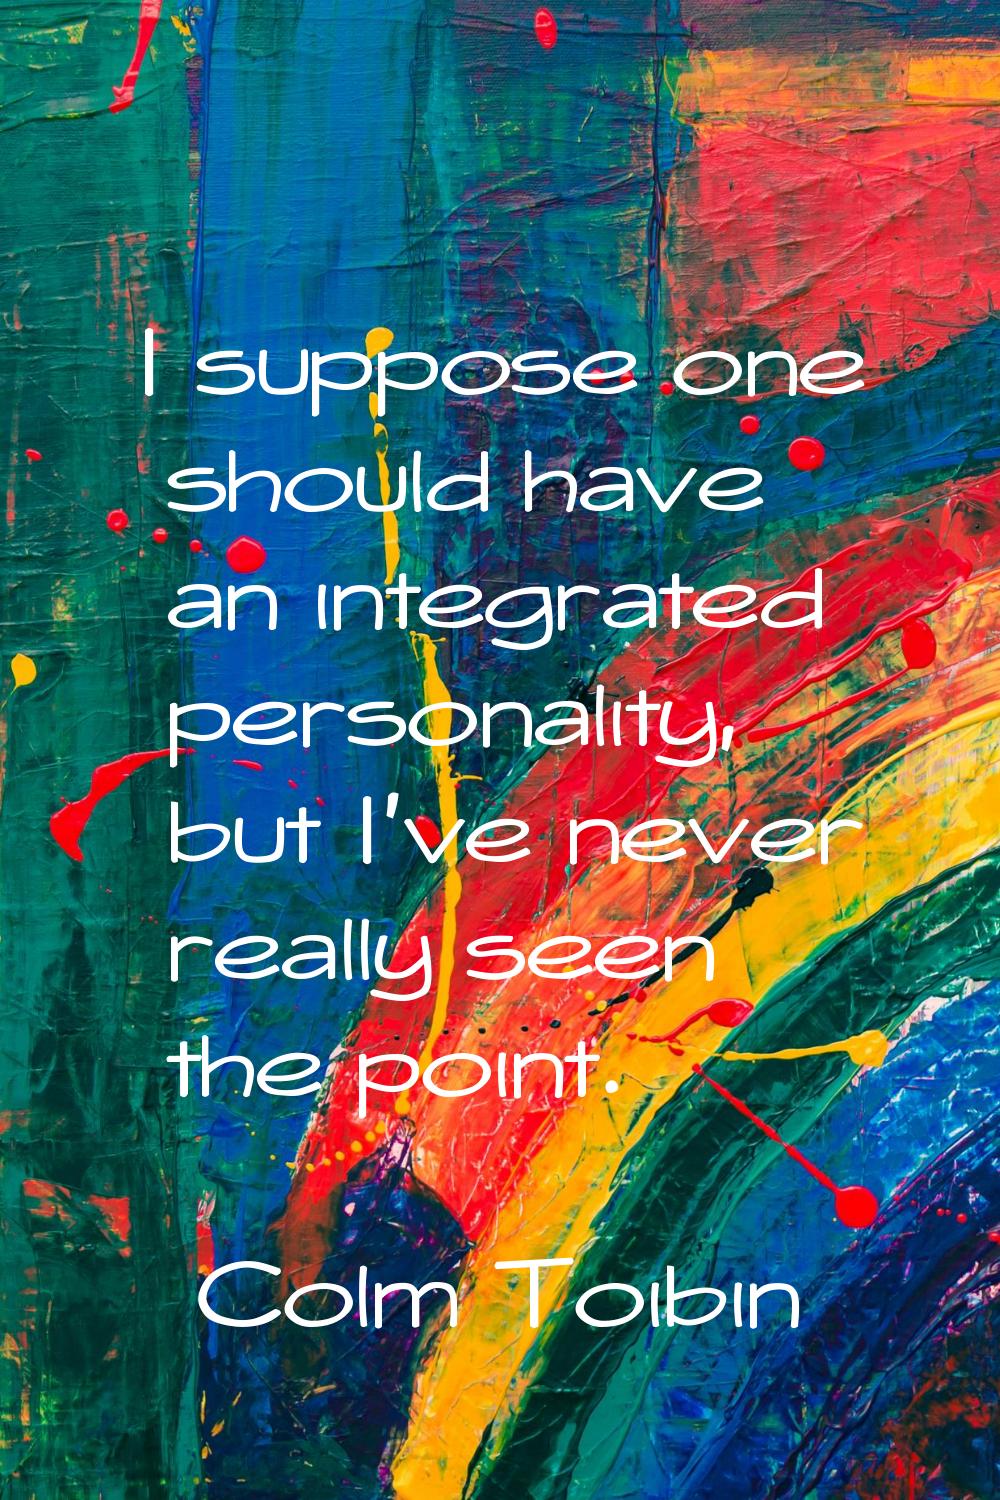 I suppose one should have an integrated personality, but I've never really seen the point.